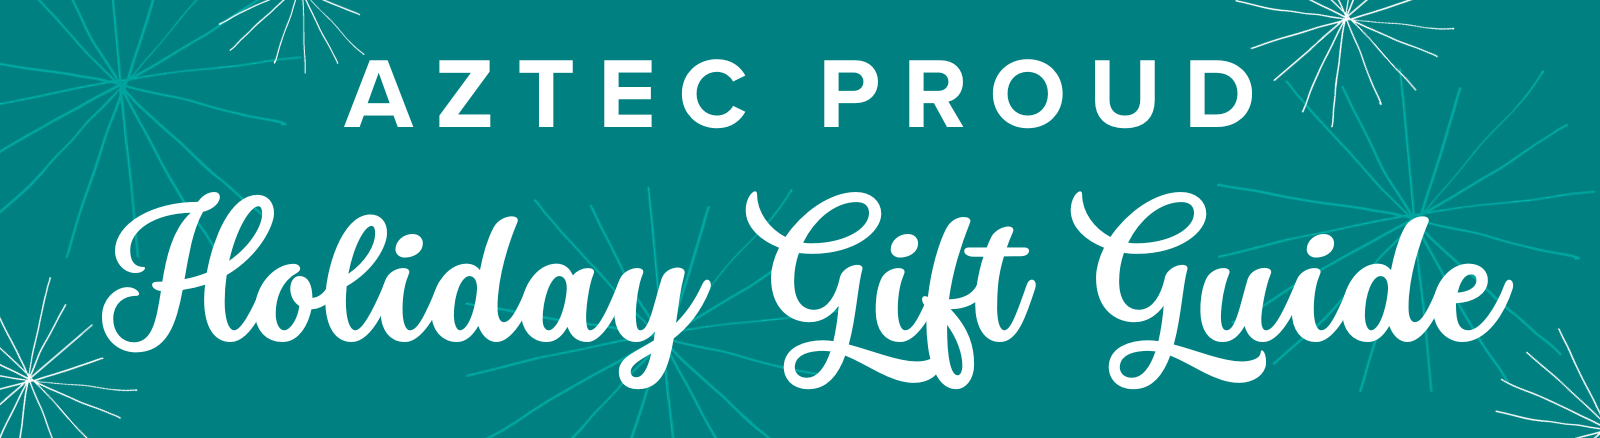 teal banner with white snowflakes and white text that says Aztec Proud Holiday Gift Guide